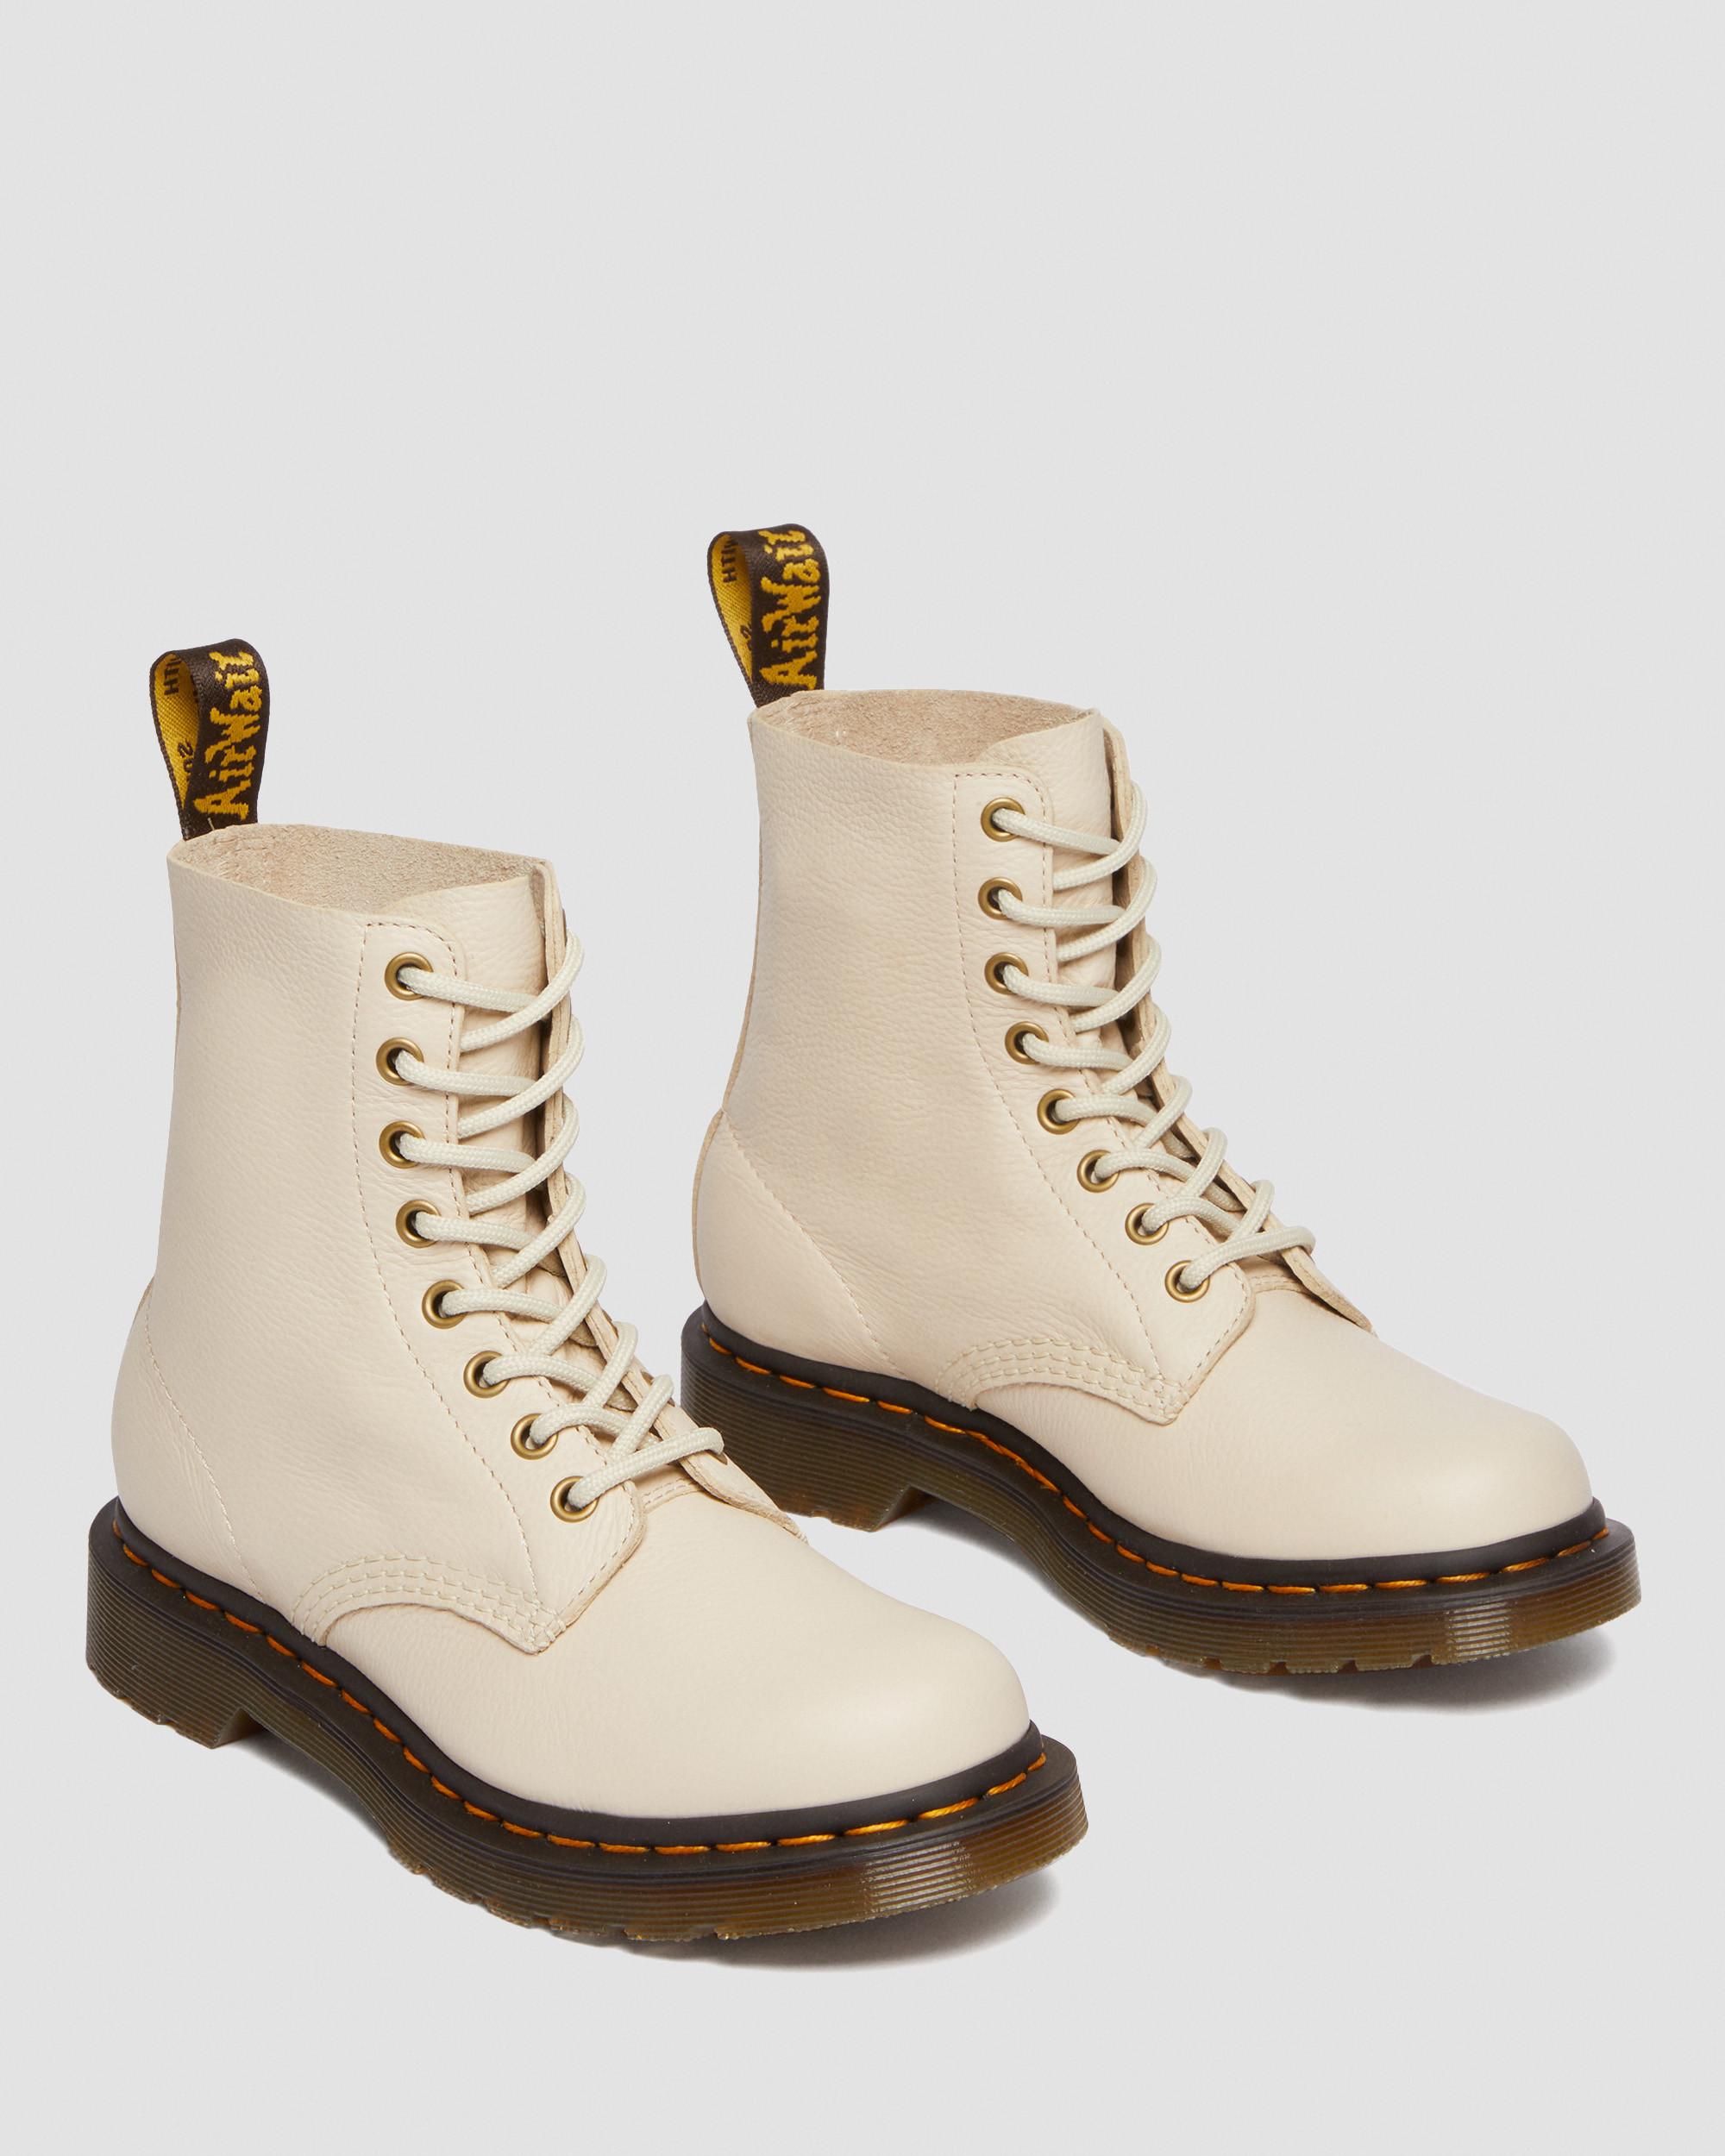 1460 Pascal Viginia Leather Lace Up Boots1460 Pascal Virginia Leather Boots Dr. Martens